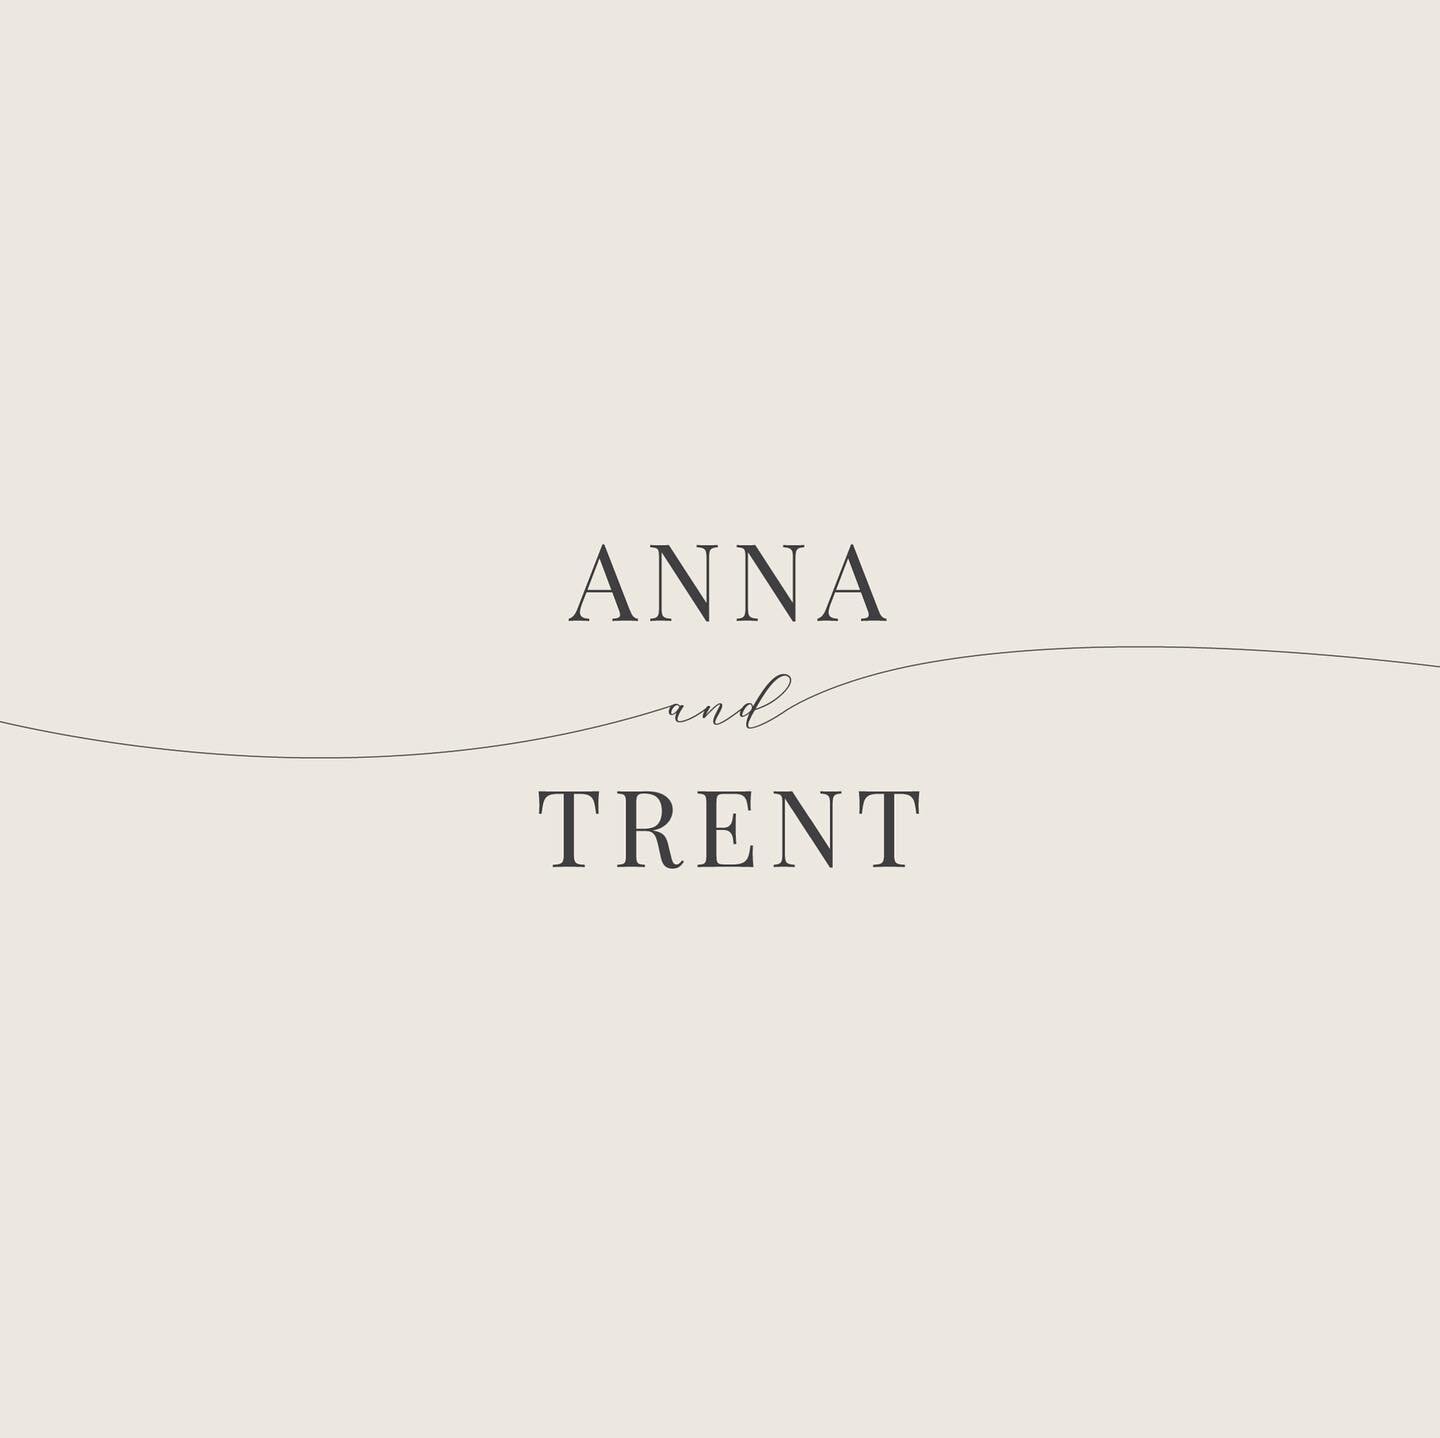 Current work in progress: a detail from one of the options we're looking at for Anna + Trent's invitations.
.
.
.
.
.
#stationerydesigner #stationerydesign #stationerylove #weddingstationery #weddinginvitations #weddinginvites #customweddinginvitatio